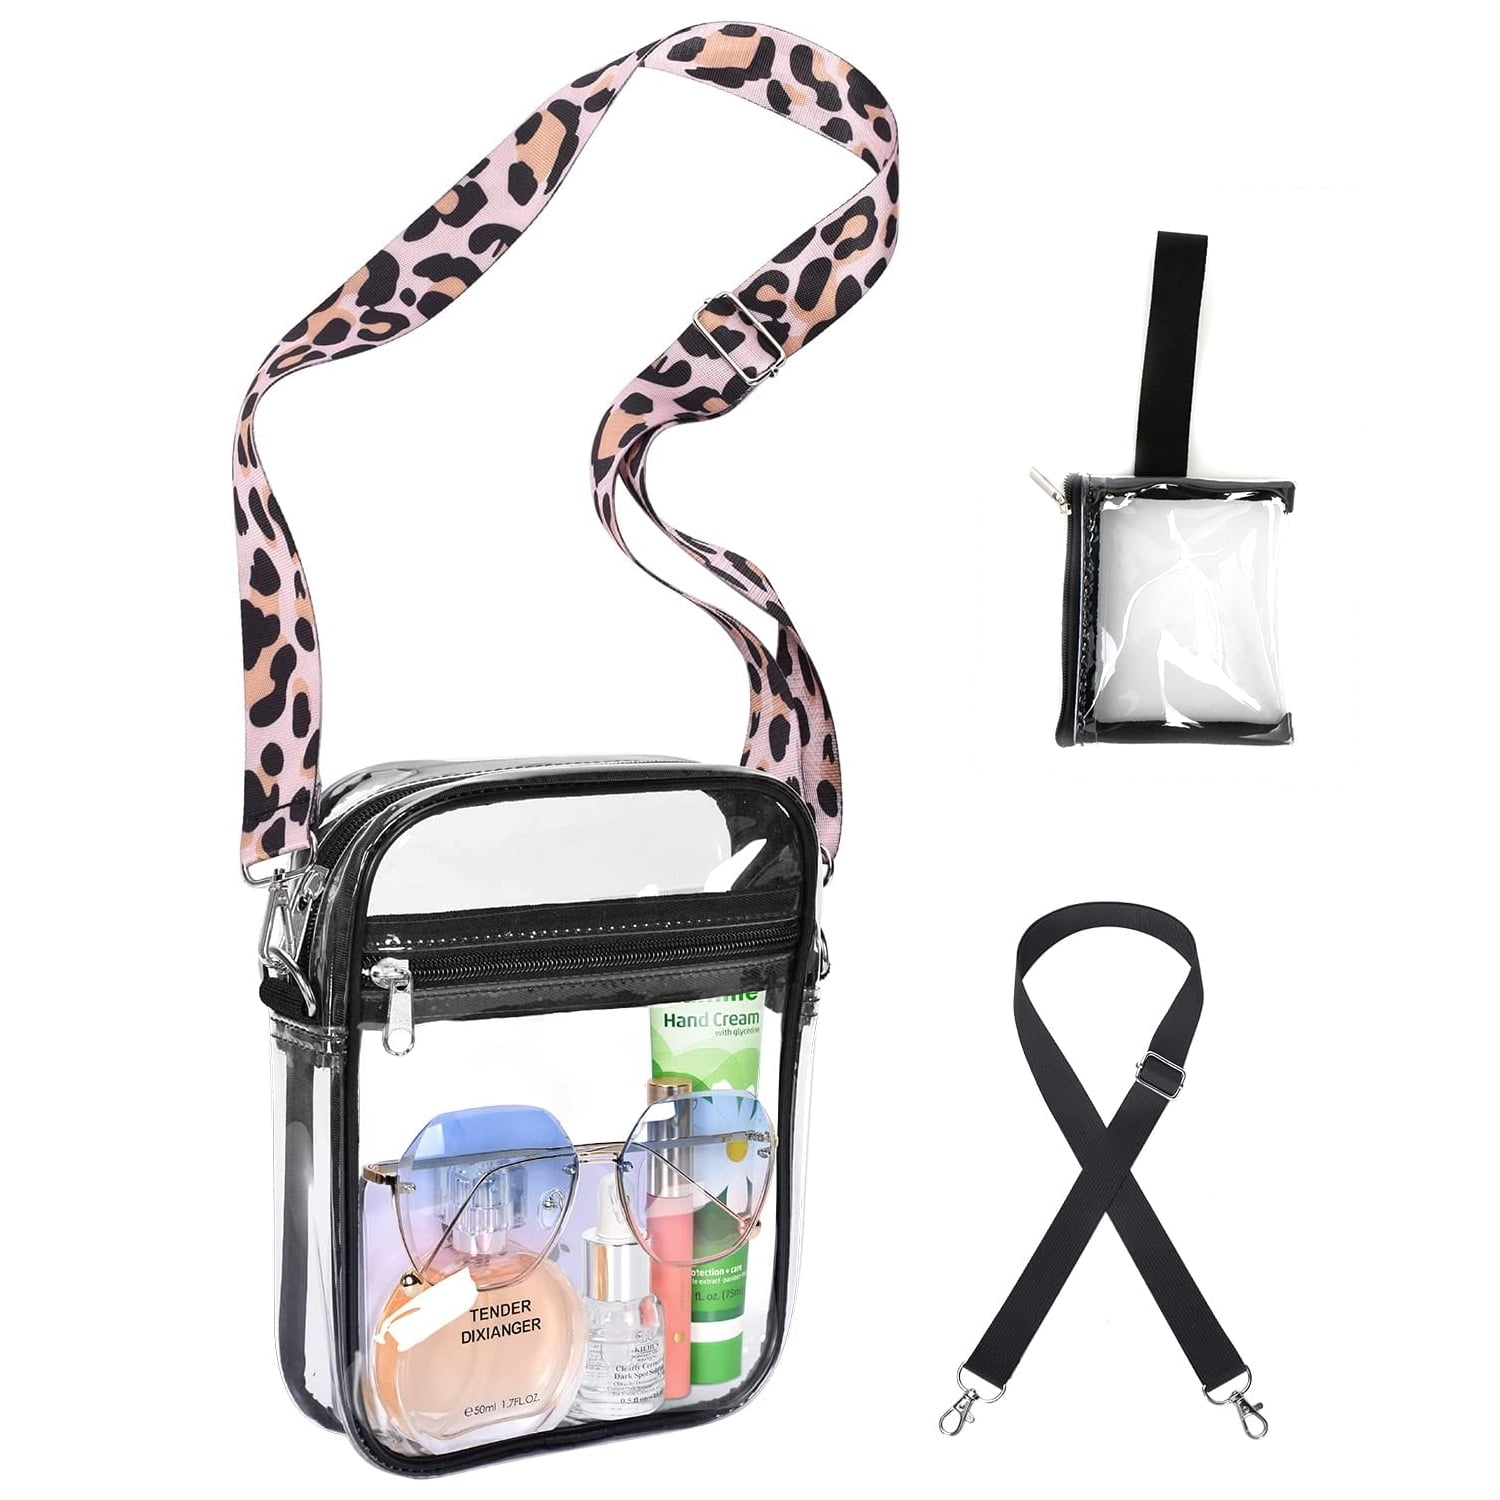 NBPOWER Clear Bag Stadium Approved, Leopard Shoulder Strap and Transparent  Crossbody Bag for Women, Clear Handbags with Interchangeable Shoulder Strap,  for Concert Sports Events & Amusement Park 